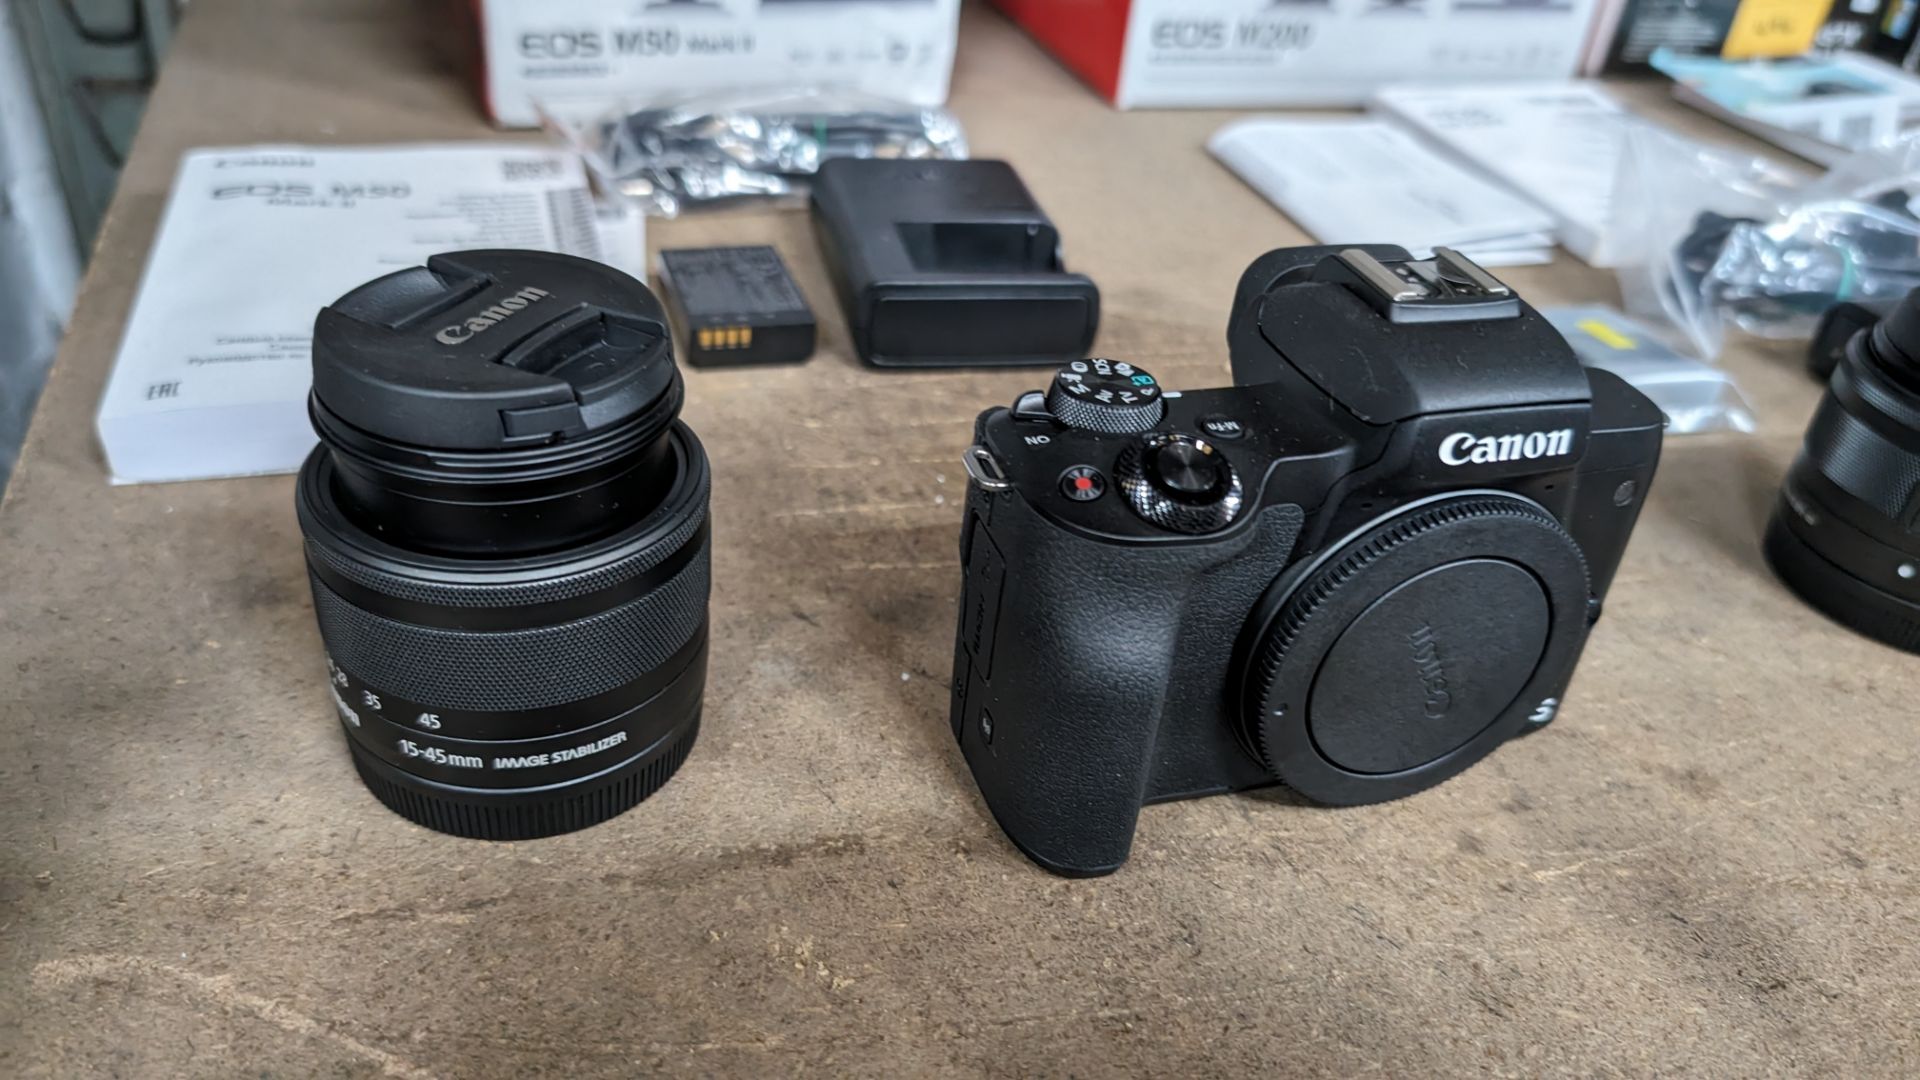 Canon EOS M50 MARK II camera, including 15-45mm image stabilizer lens, plus battery and charger - Image 5 of 14